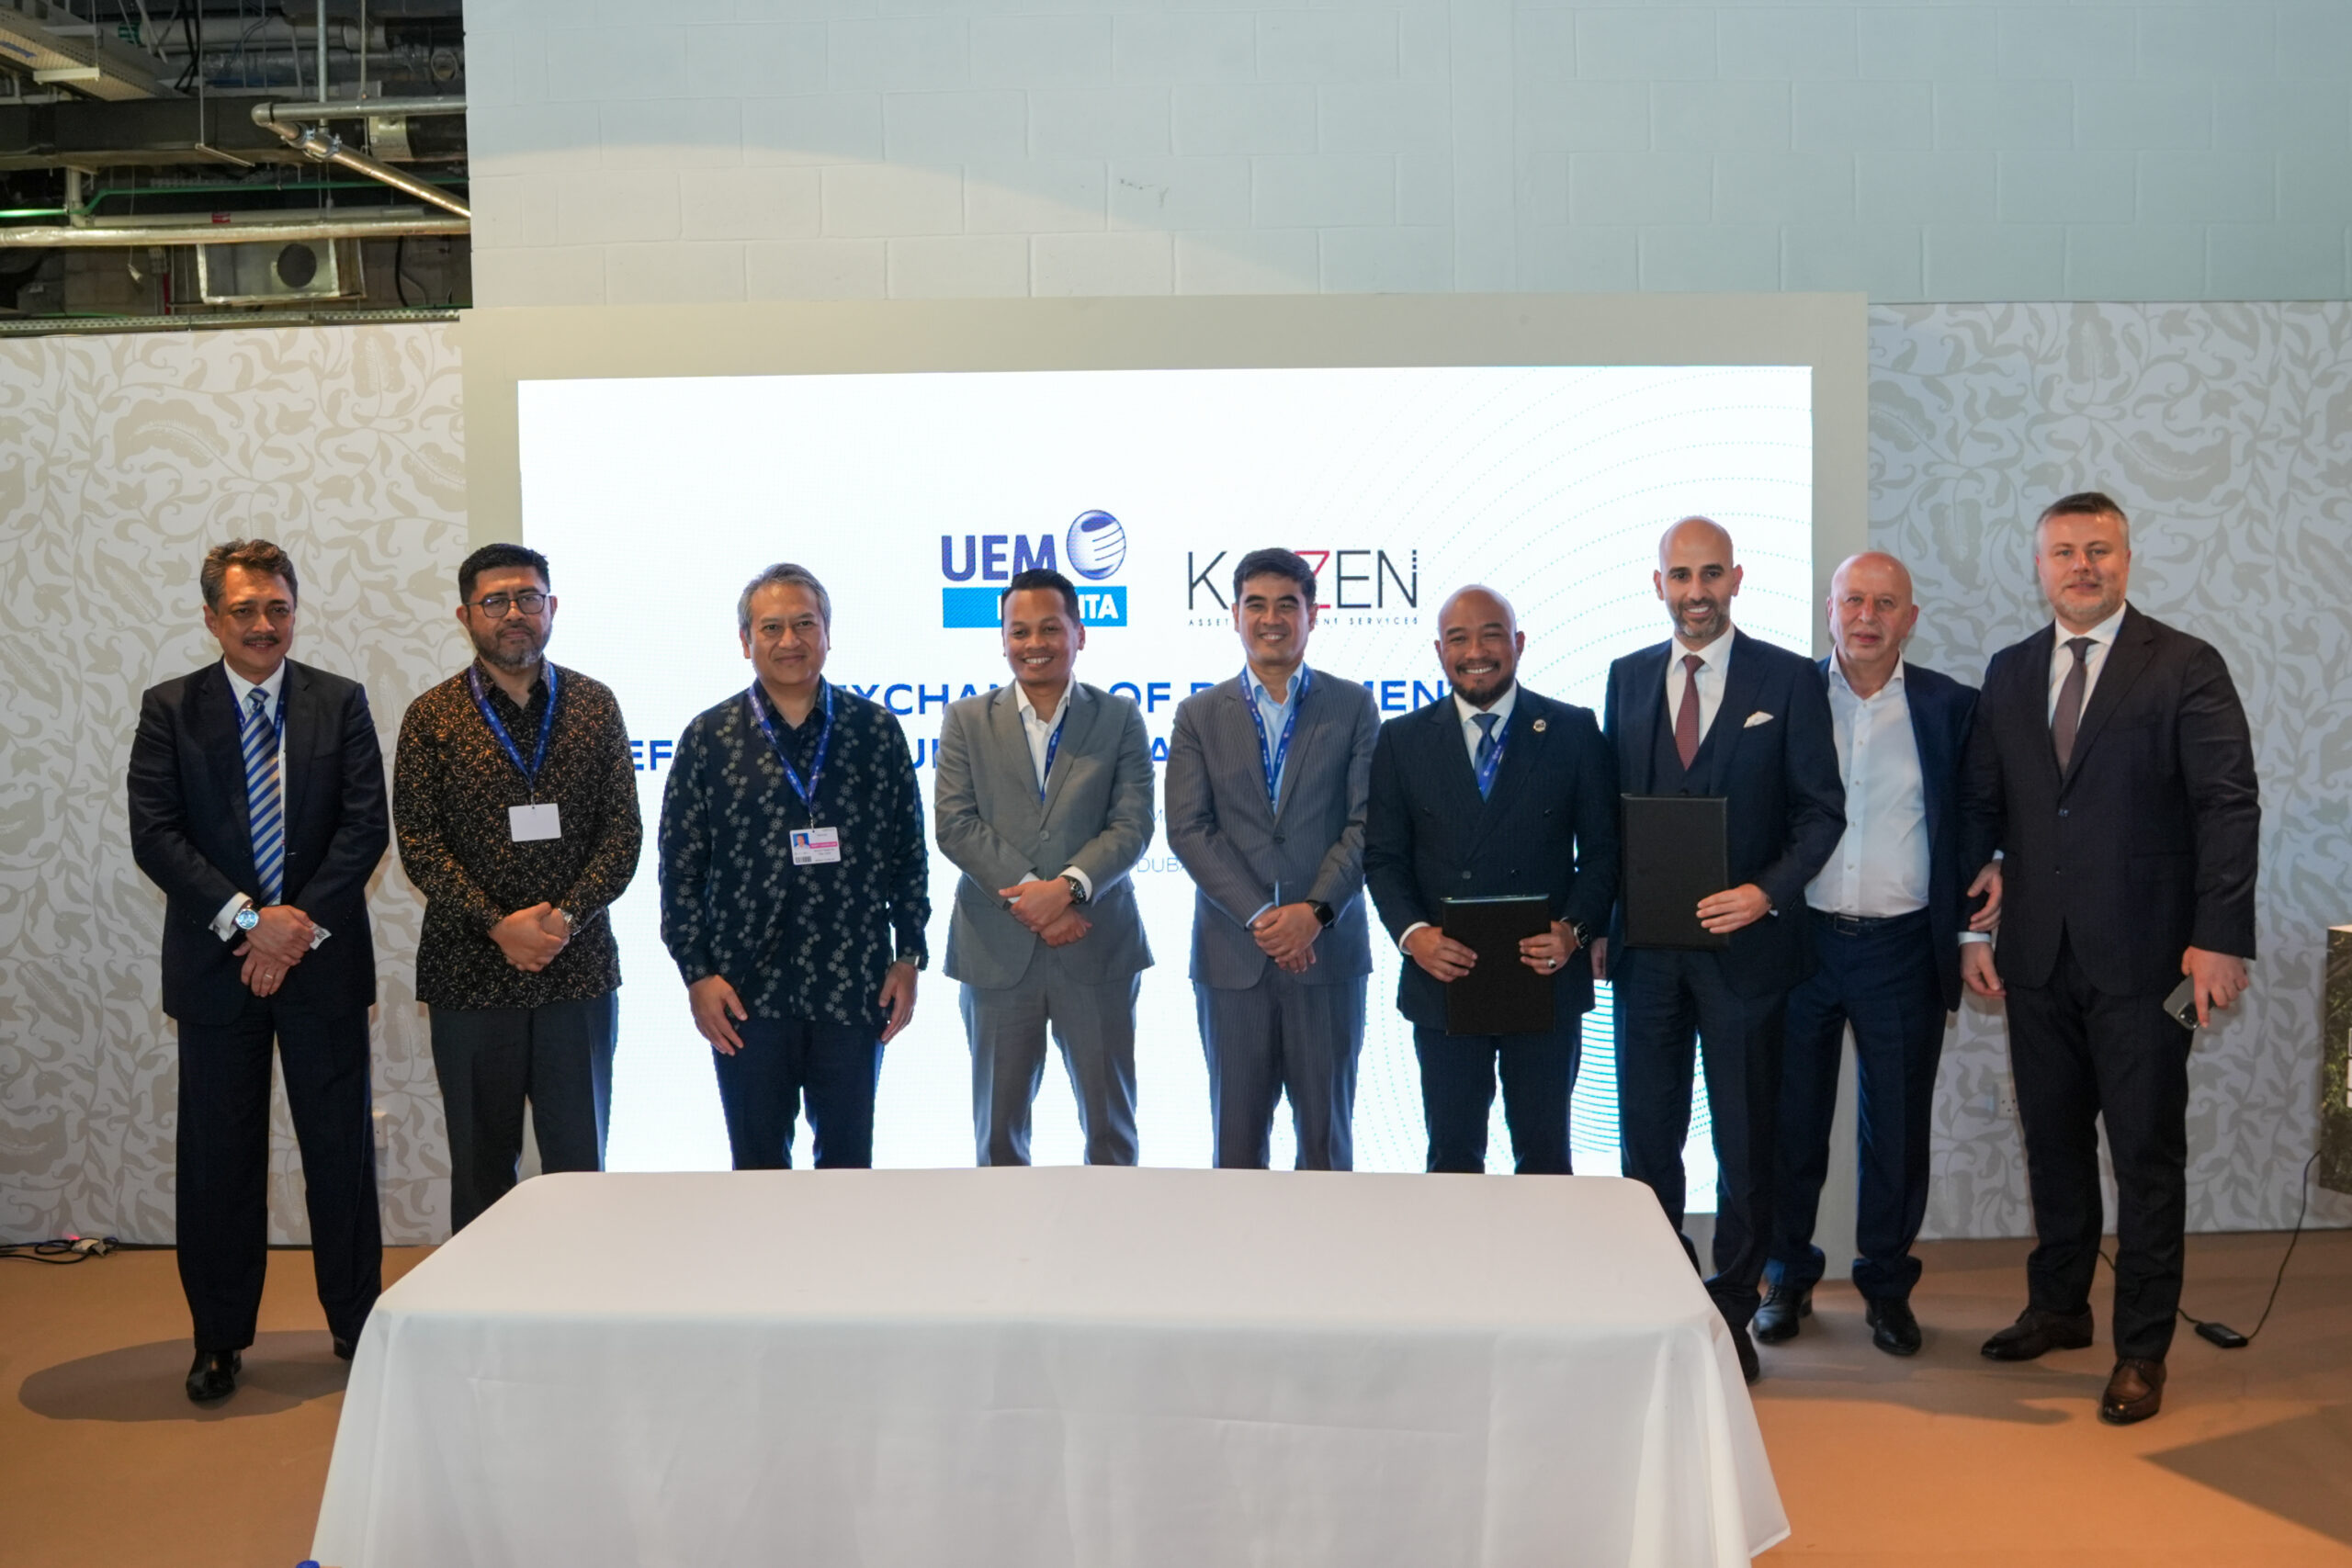 Exchange of document for definitive purchase agreement execution with kaizen group